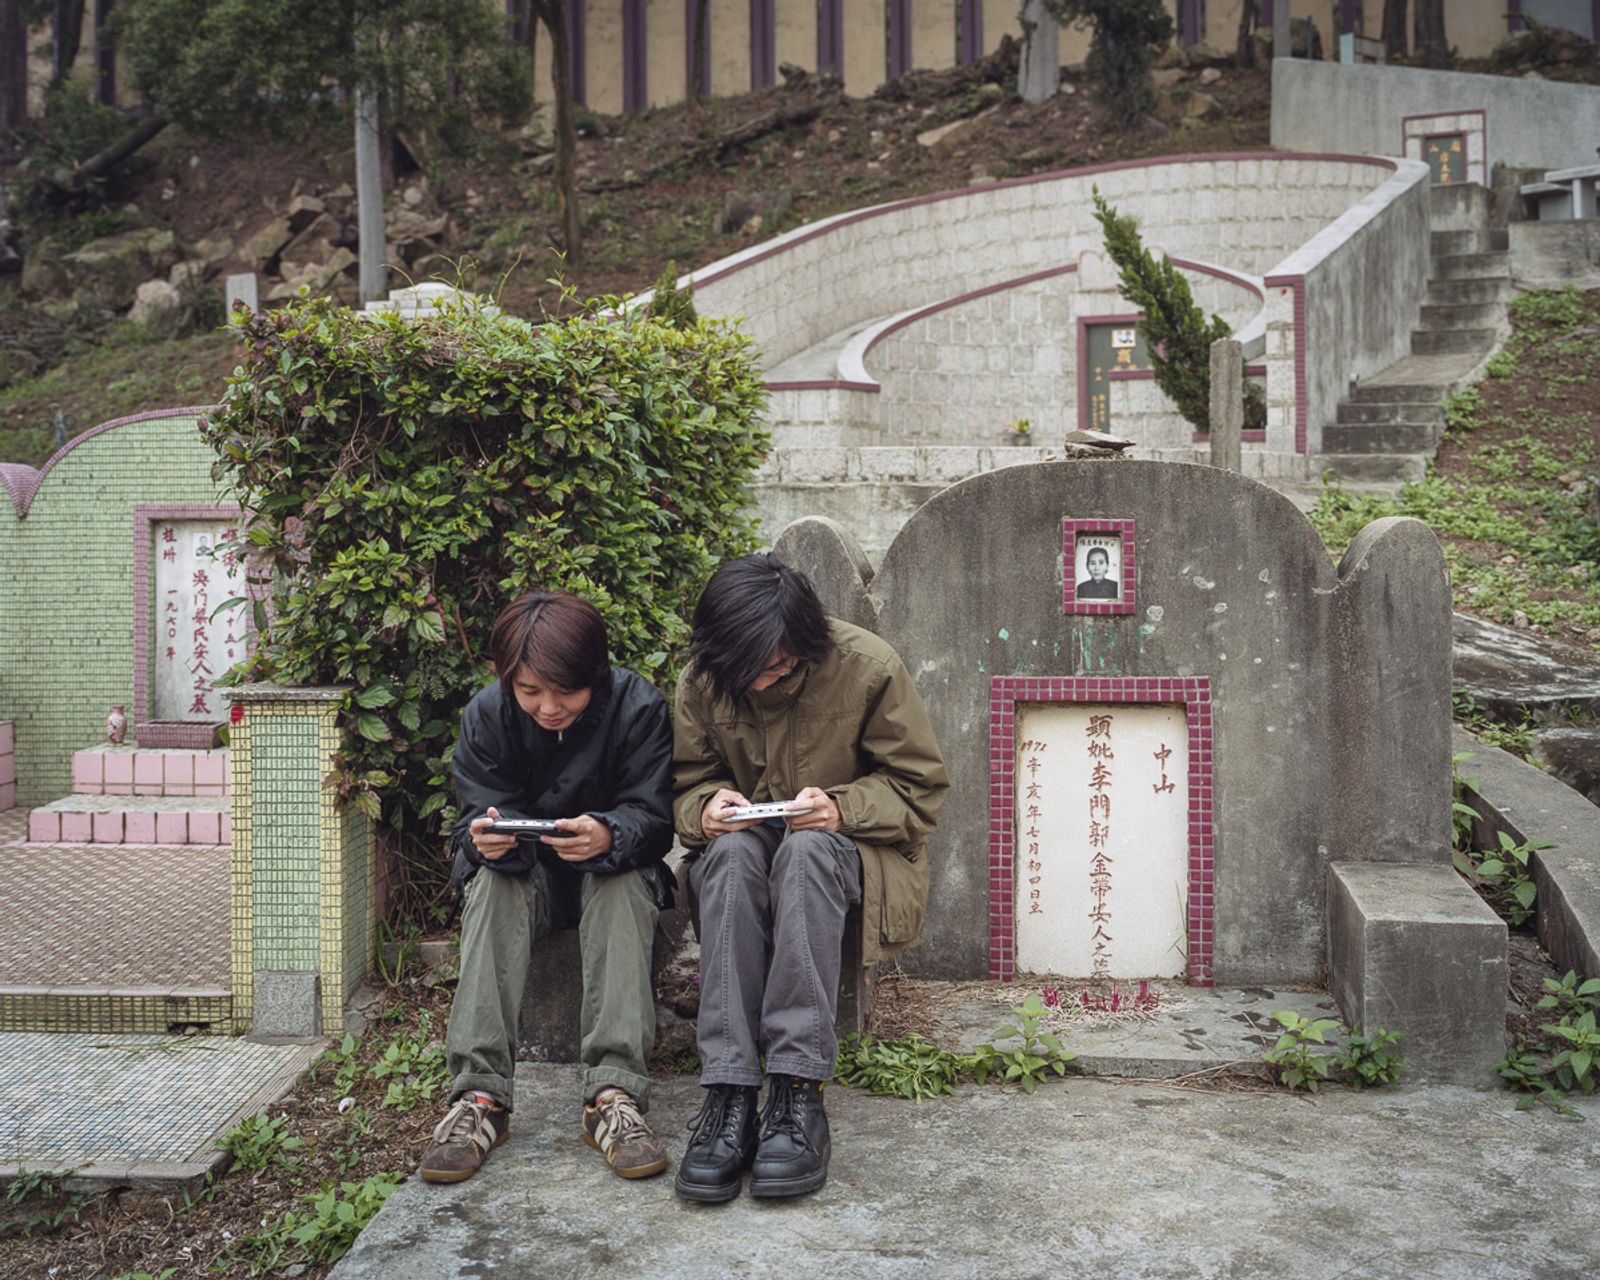 © Adam Lampton - Teenagers on their Grandmother's Grave, Macao (Img#: 19) (Size: 28x30") Archival Inkjet Print (2007/18)